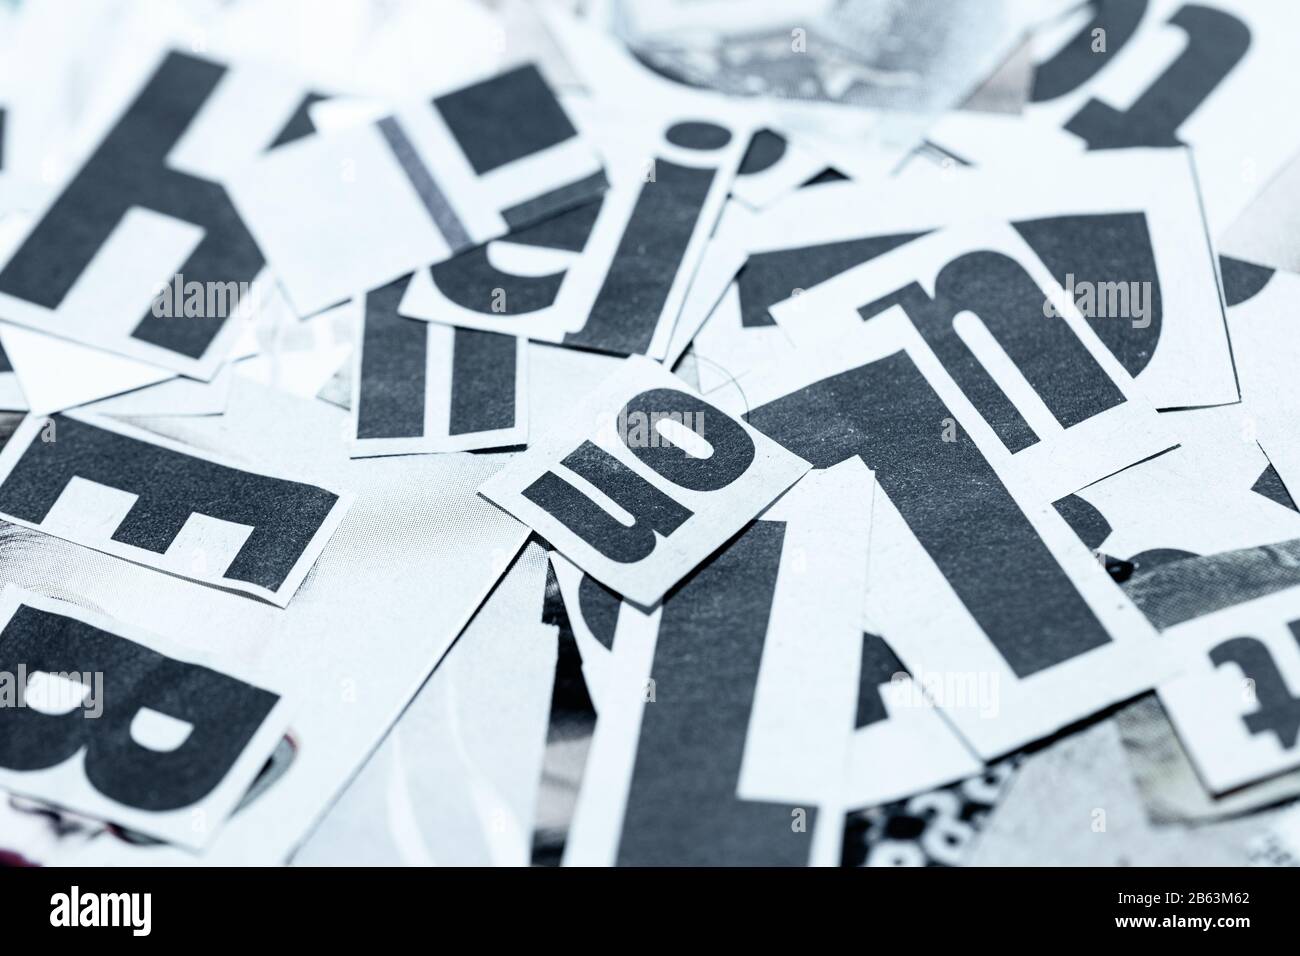 Creative backgroun made of newspaper cutout fonts scattered on table top Stock Photo